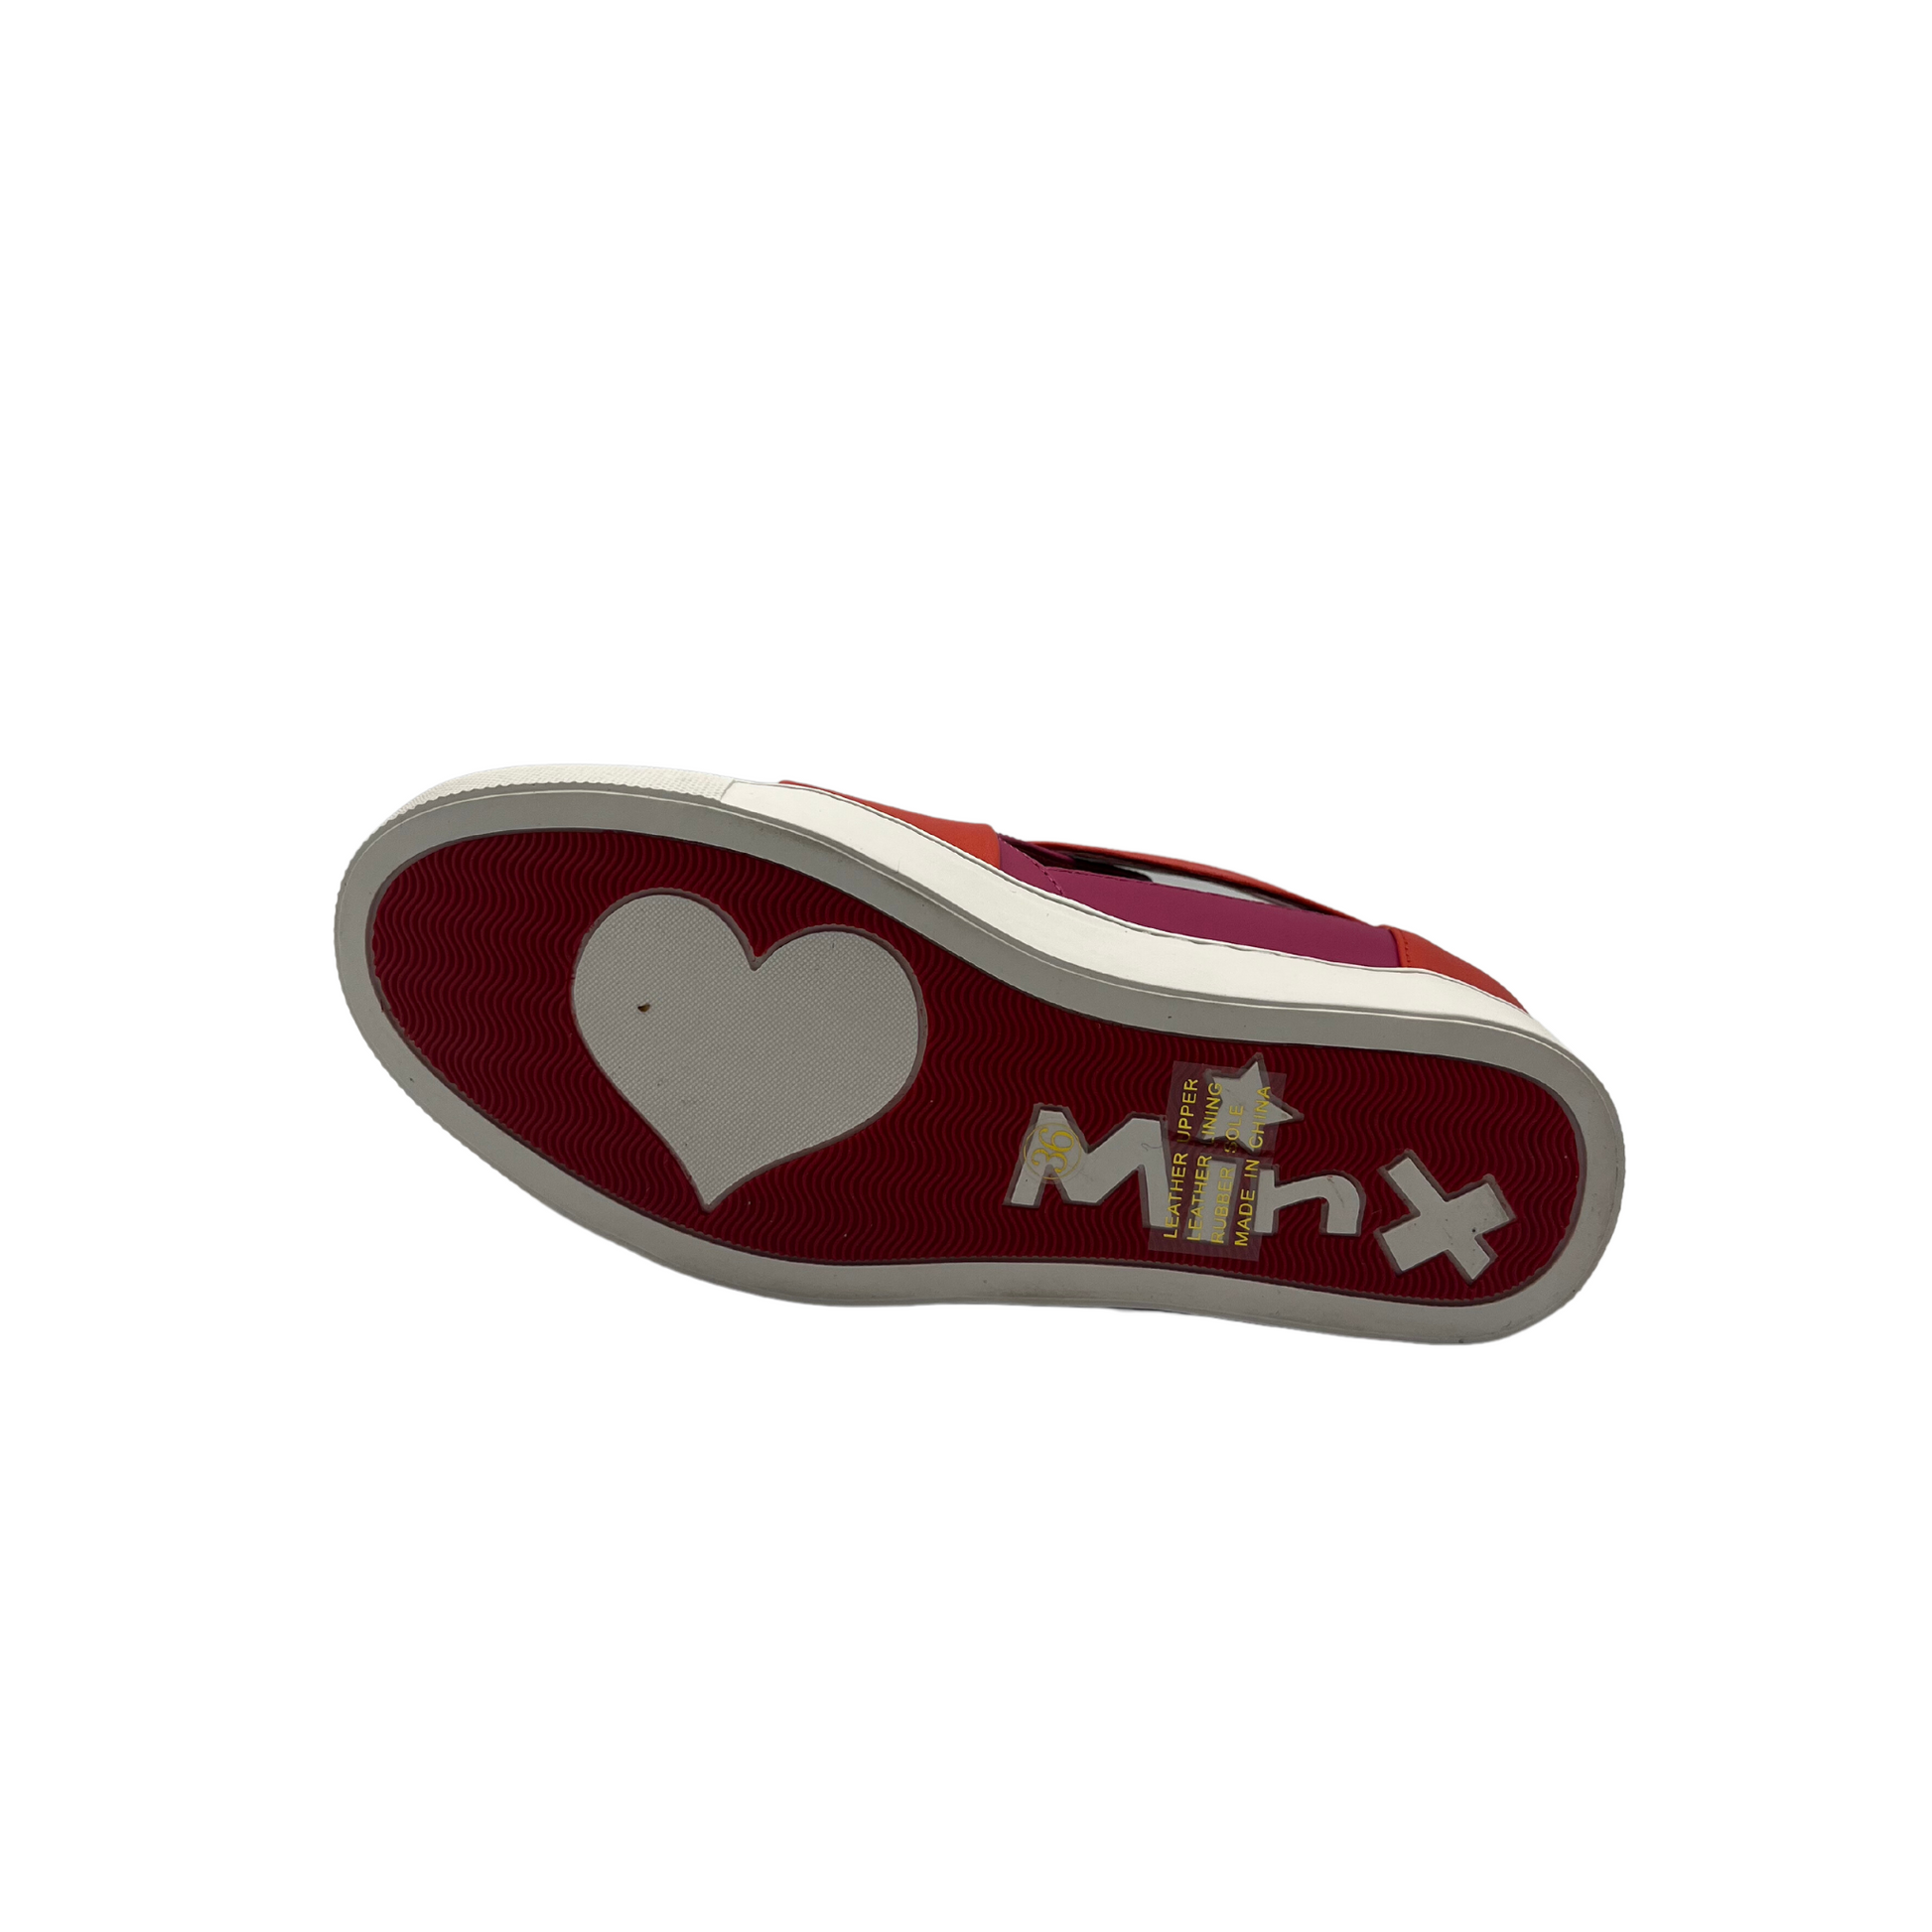 Minx Donatella has a 5cm heel elevation and a sole made of rubber with the MINX logo.